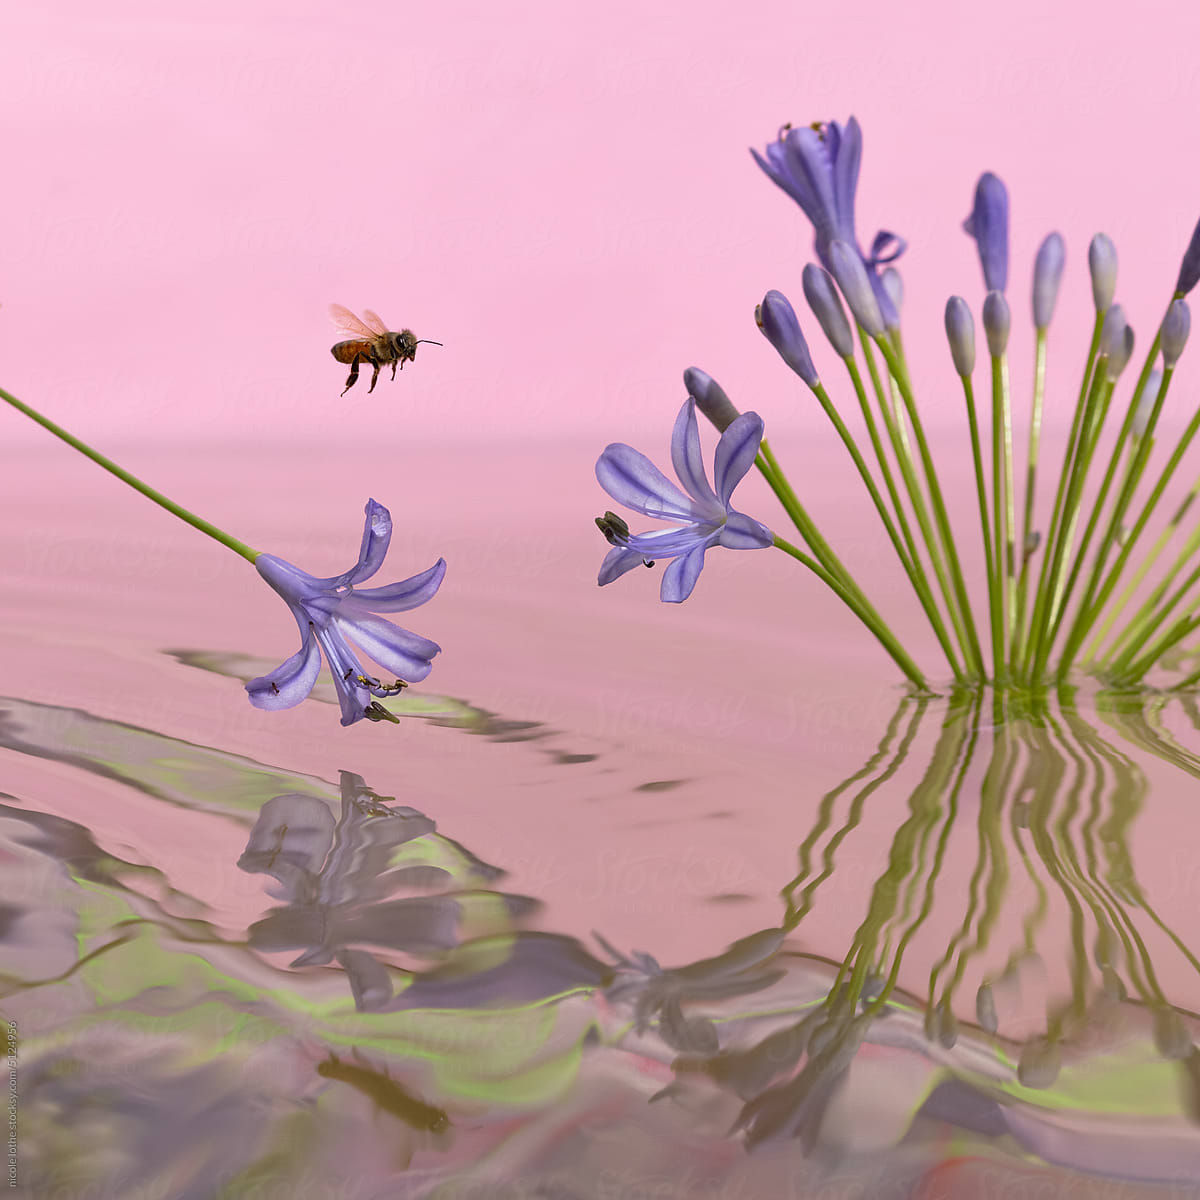 Bee flying towards flowers, psychedelic reflections.